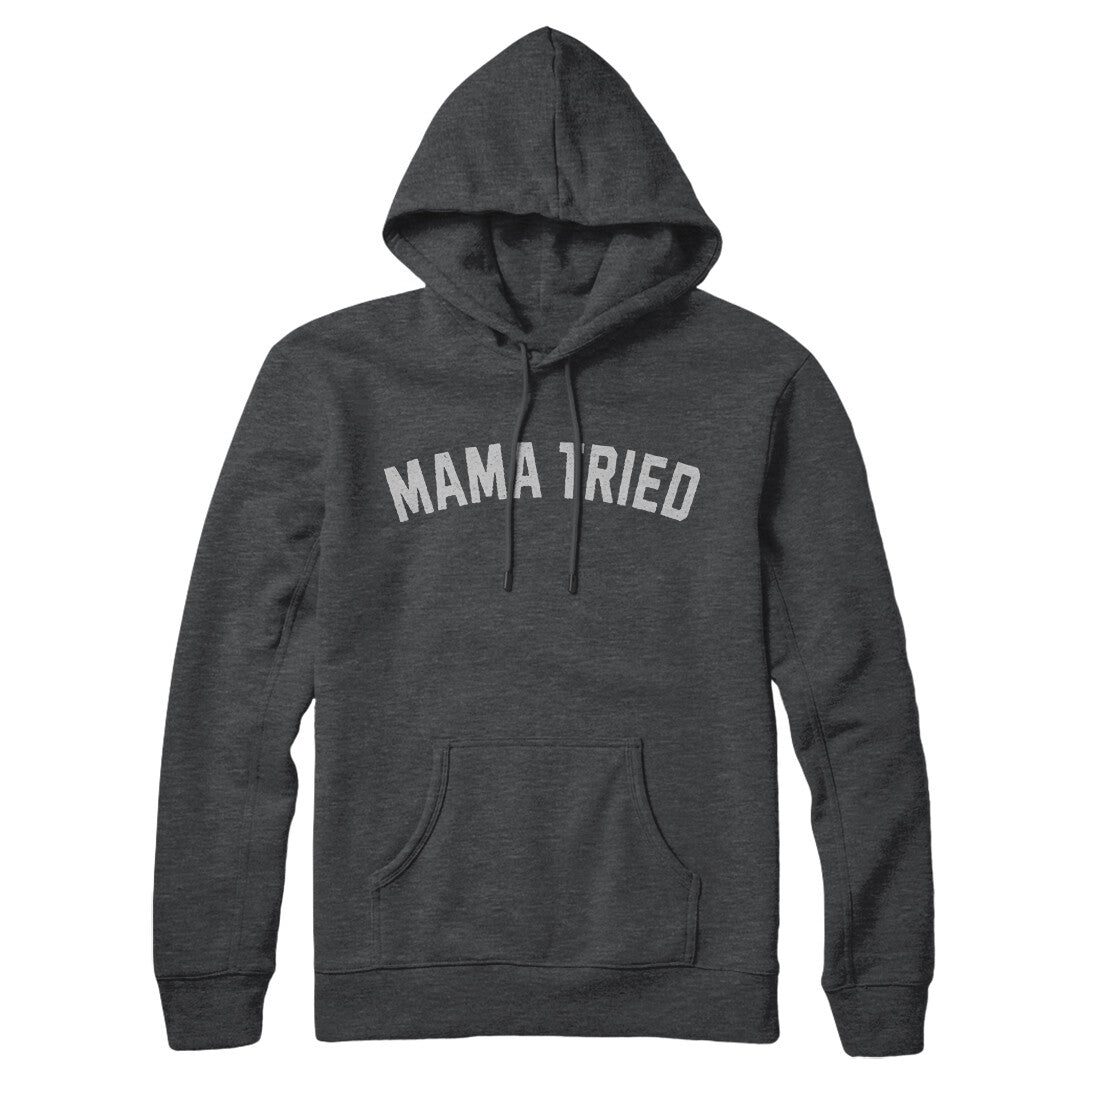 Mama Tried in Charcoal Heather Color